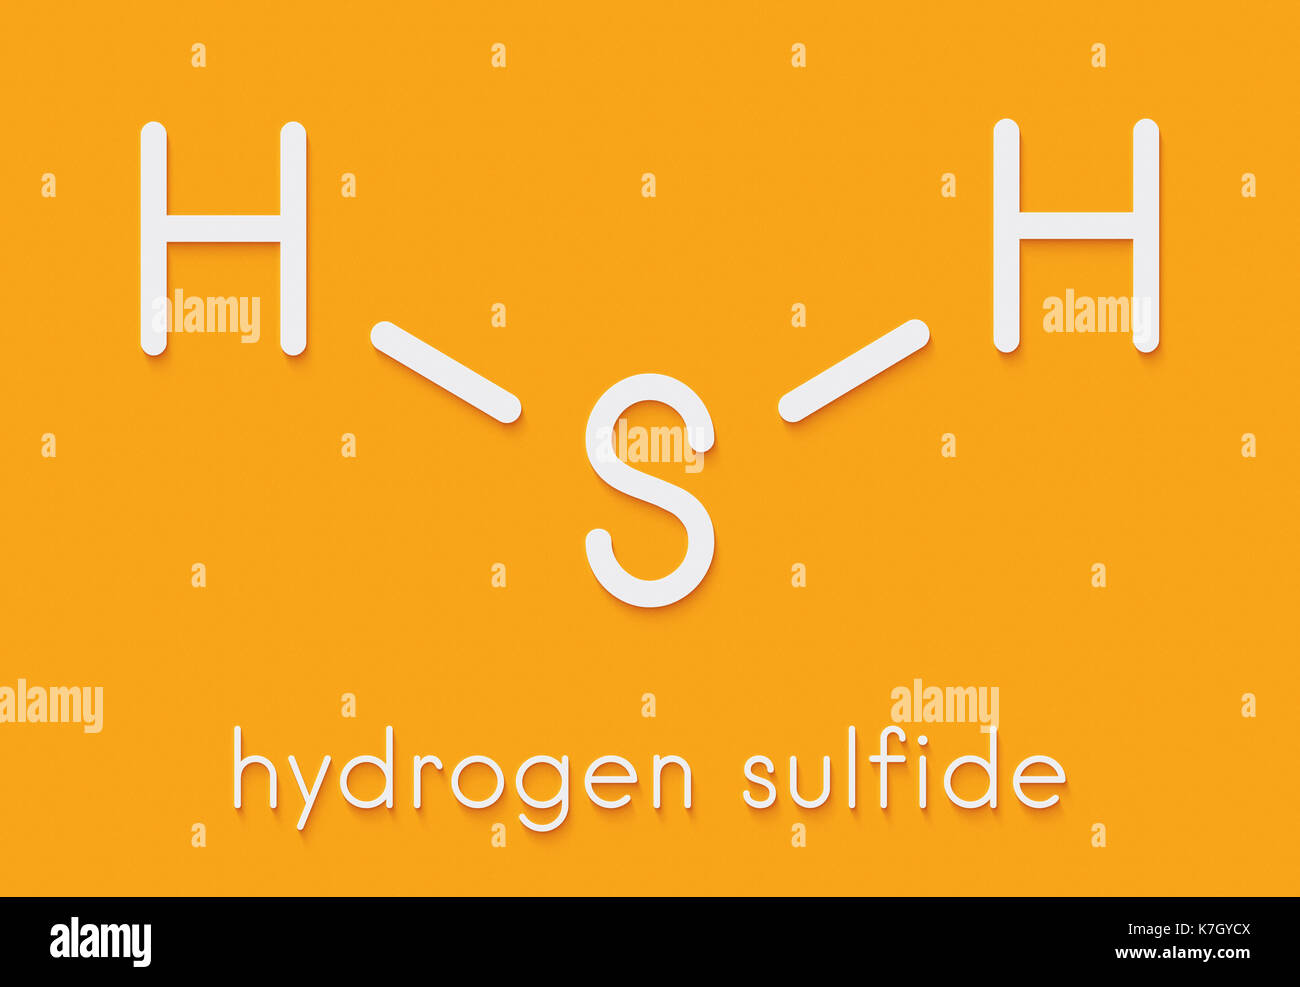 Hydrogen sulfide (H2S) molecule. Toxic gas with characteristic odor of rotten eggs. Skeletal formula. Stock Photo